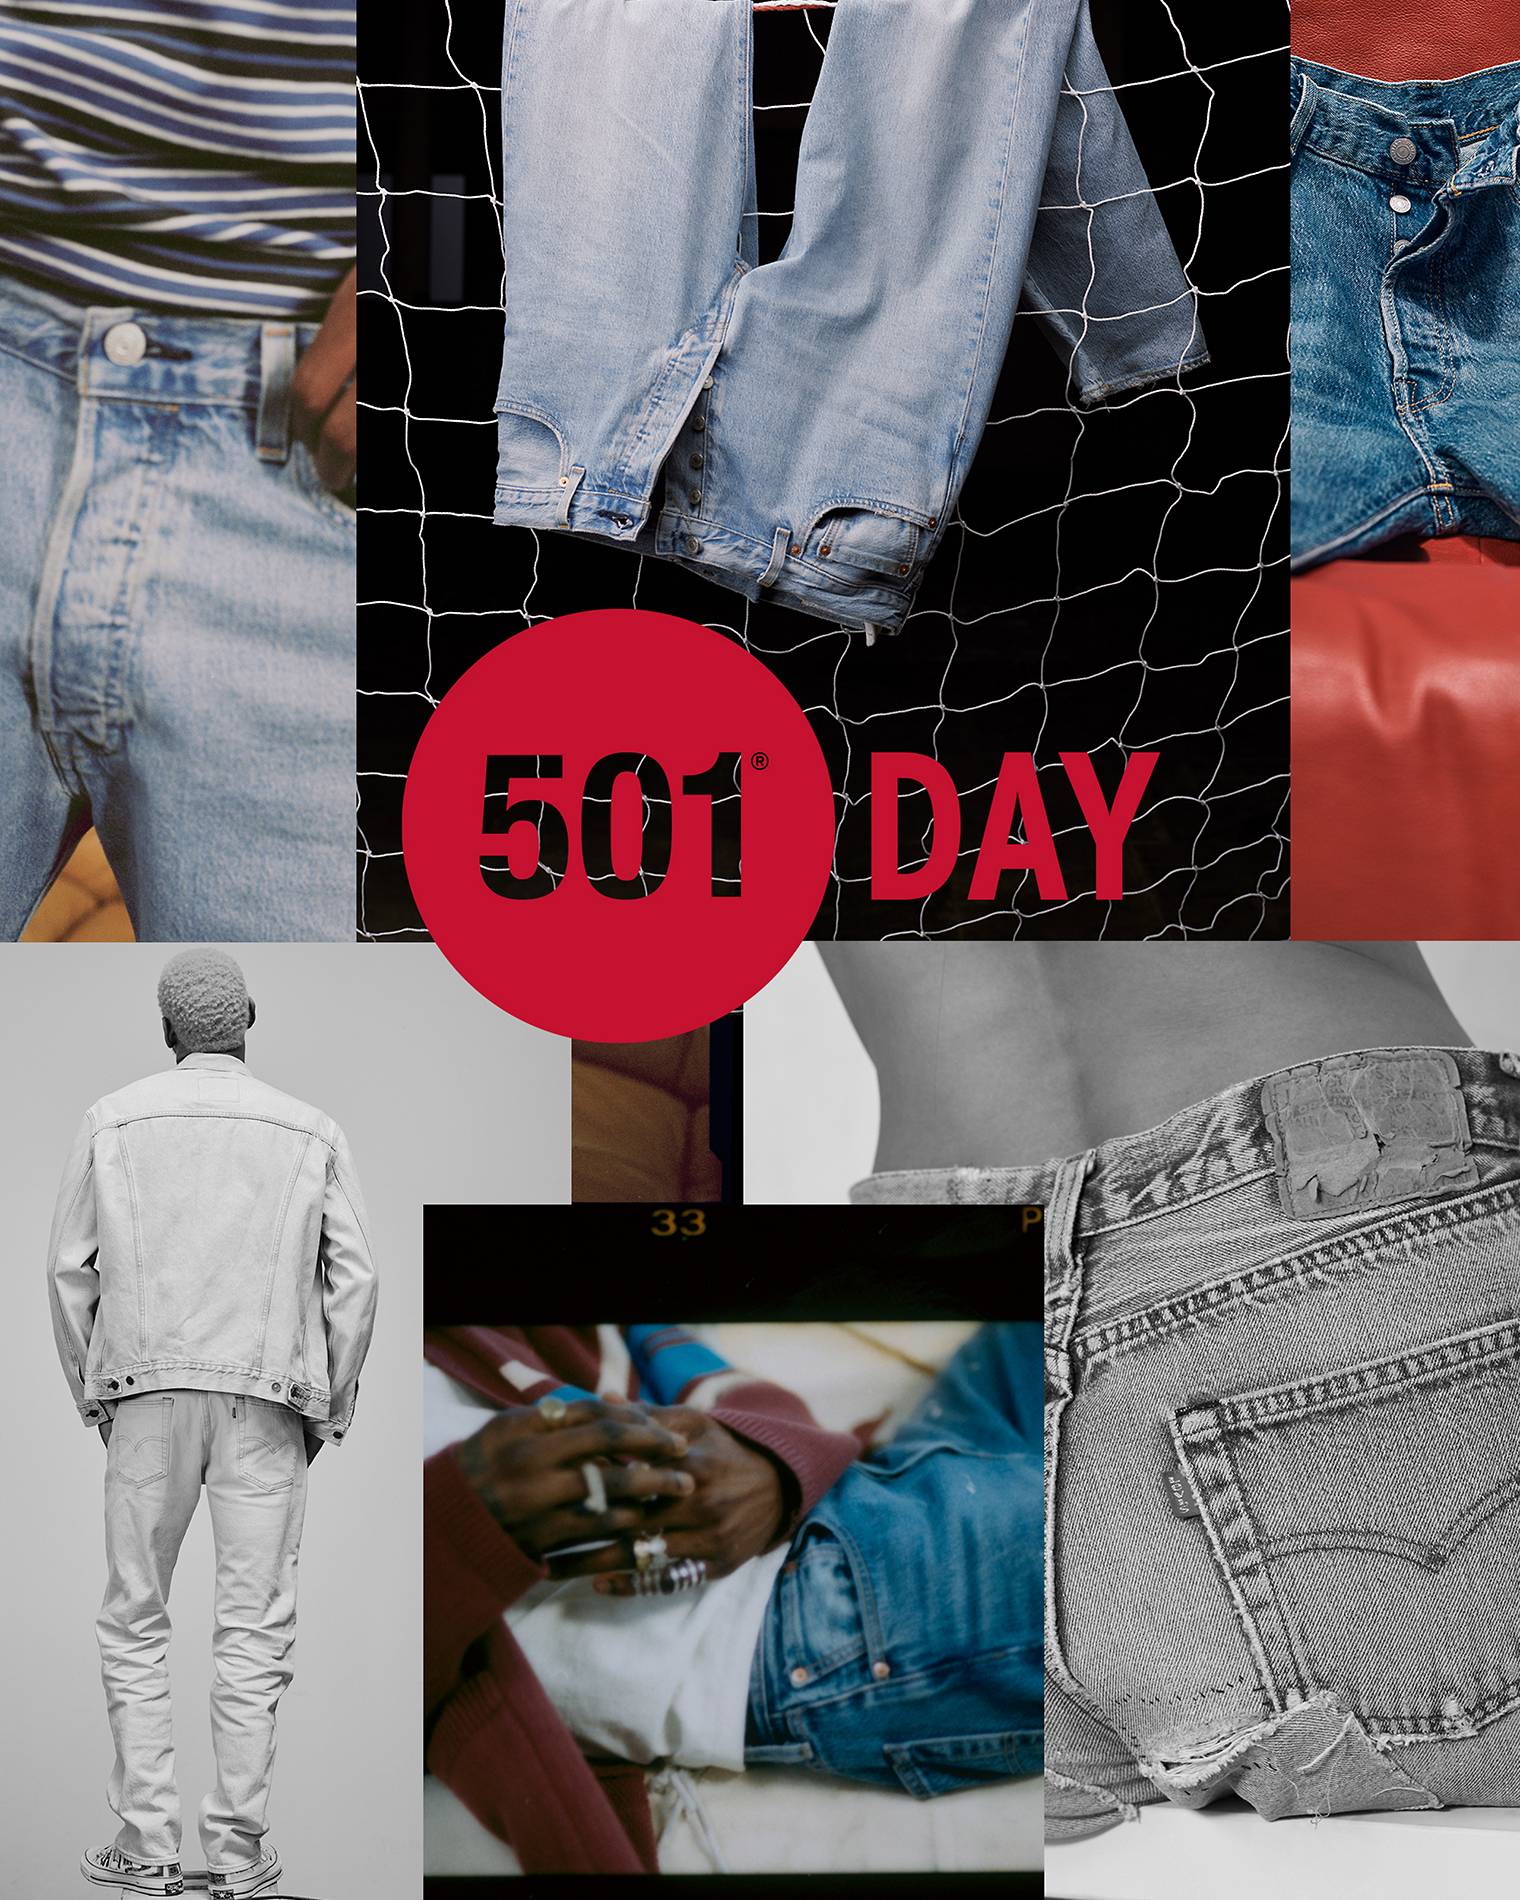 Levi’s 501® Jeans styled in differently on celebrity social media influencers